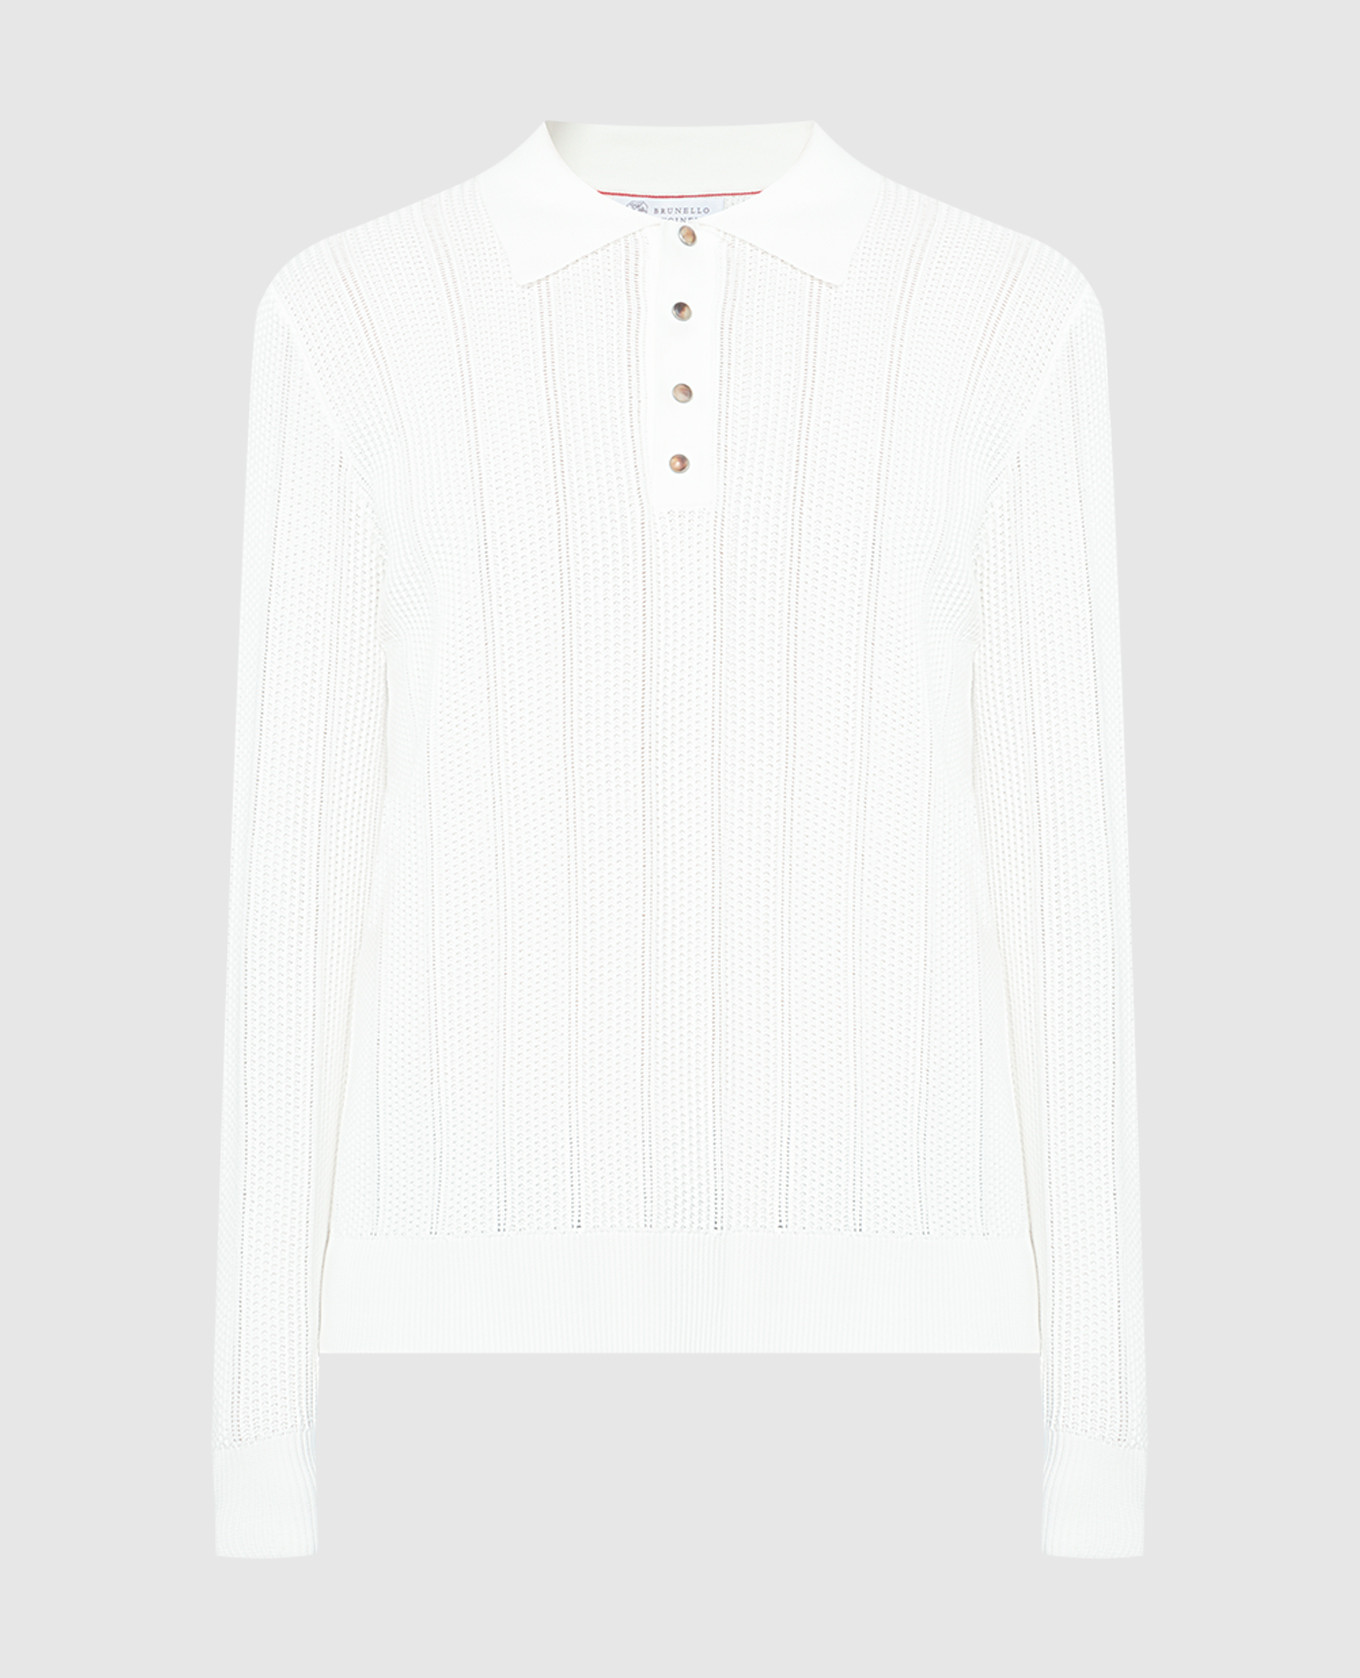 White polo shirt with a pattern